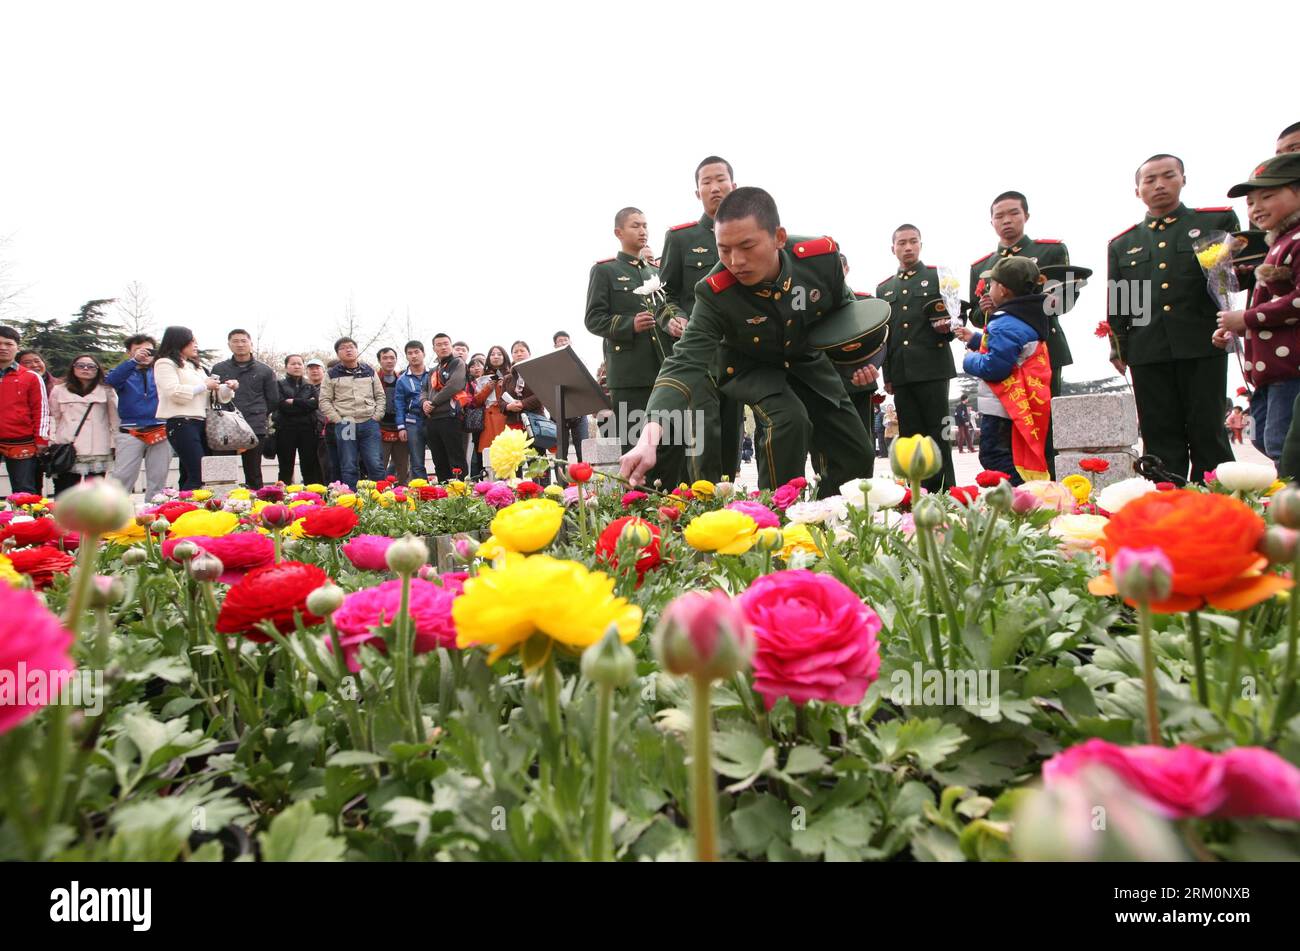 Bildnummer: 59460479  Datum: 30.03.2013  Copyright: imago/Xinhua Soldiers present flowers at a monument during a memorial ceremony held at Yuhuatai Martyr Cemetery in Nanjing, capital of east China s Jiangsu Province, March 30, 2013. Various memorial ceremonies were held across the country to pay respect to martyrs ahead of the Qingming Festival, or Tomb Sweeping Day, which falls on April 4 this year. (Xinhua) (ry) CHINA-QINGMING FESTIVAL-MEMORIAL CEREMONIES (CN) PUBLICATIONxNOTxINxCHN Gesellschaft xas x2x 2013 quer o0 Friedhof Trauer Gedenken  Totenfest Totengedenken Blumen     59460479 Date Stock Photo